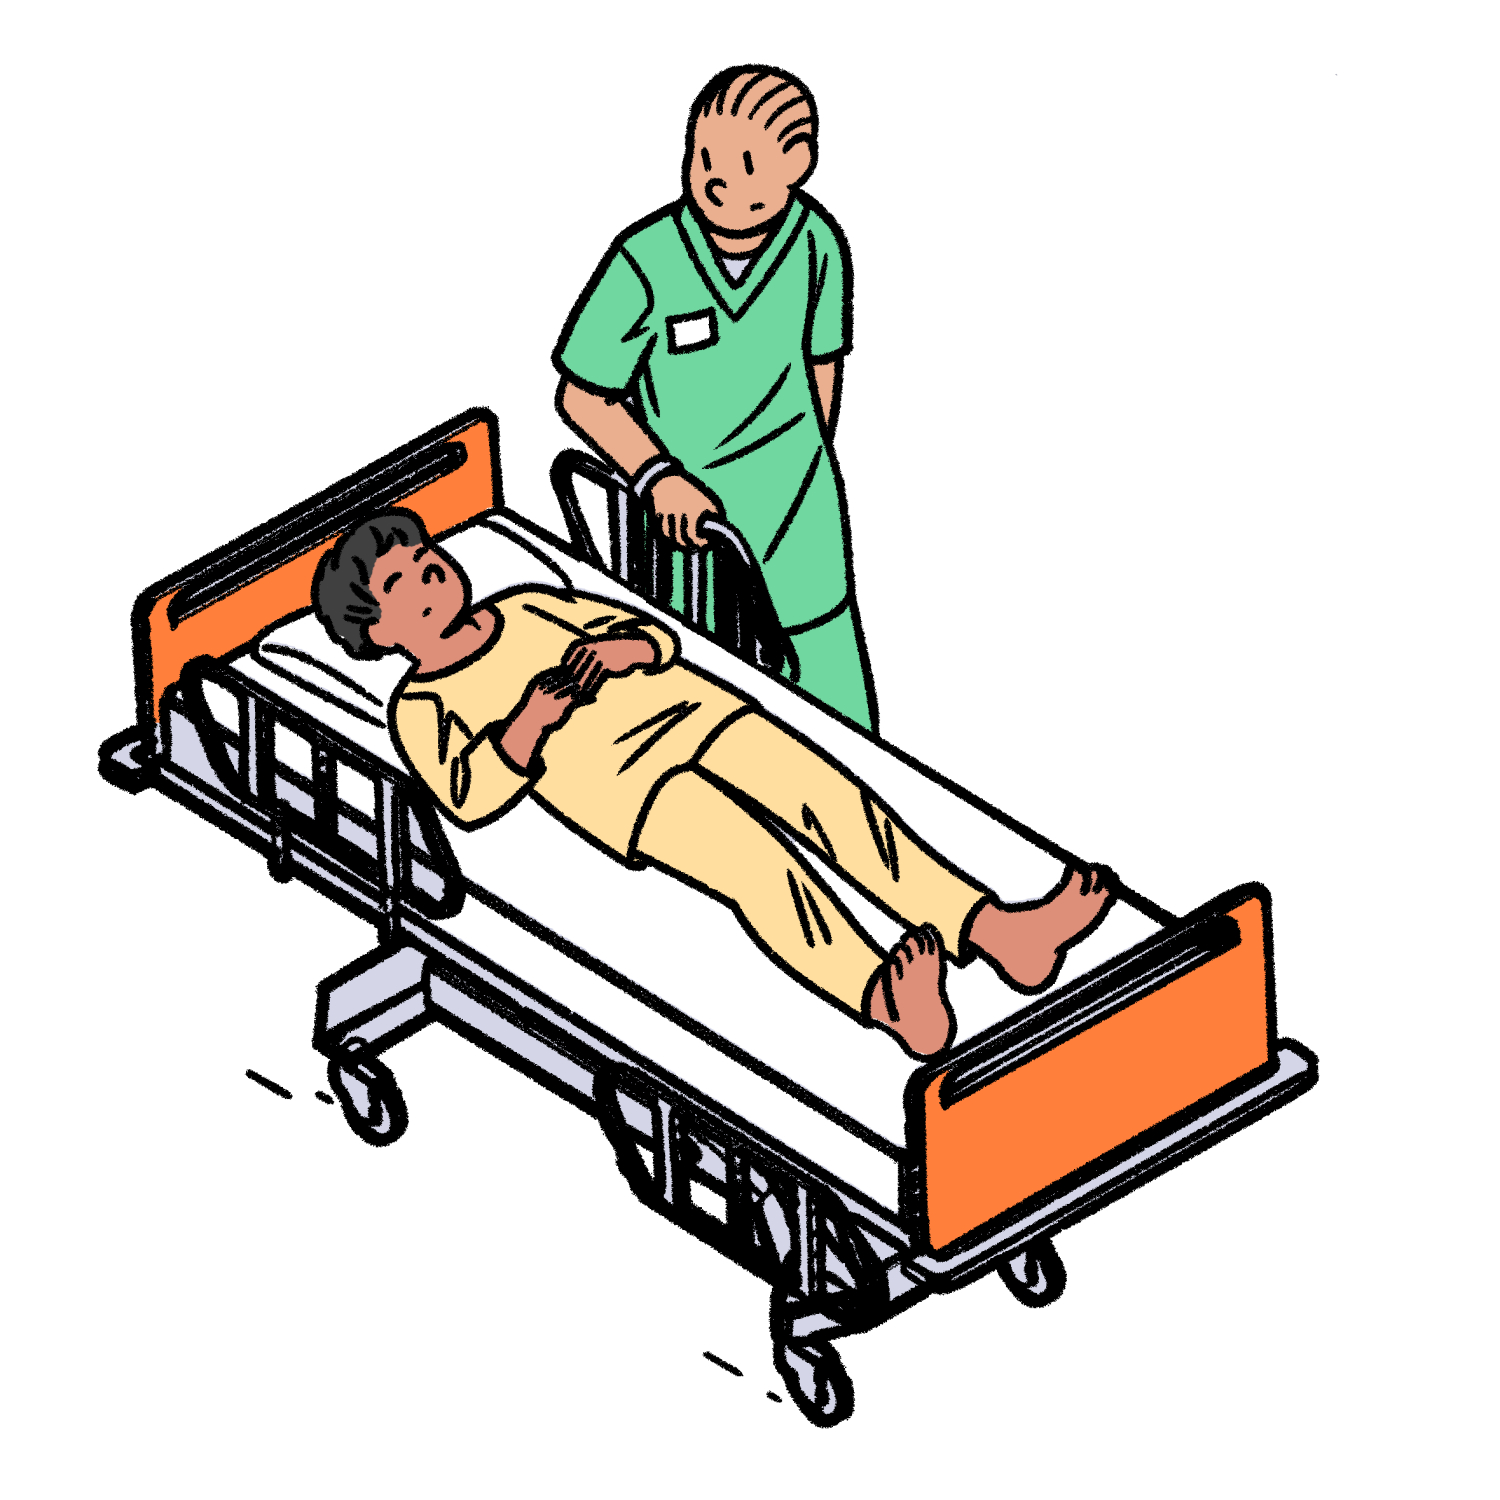 Person lying on hospital bed illustration